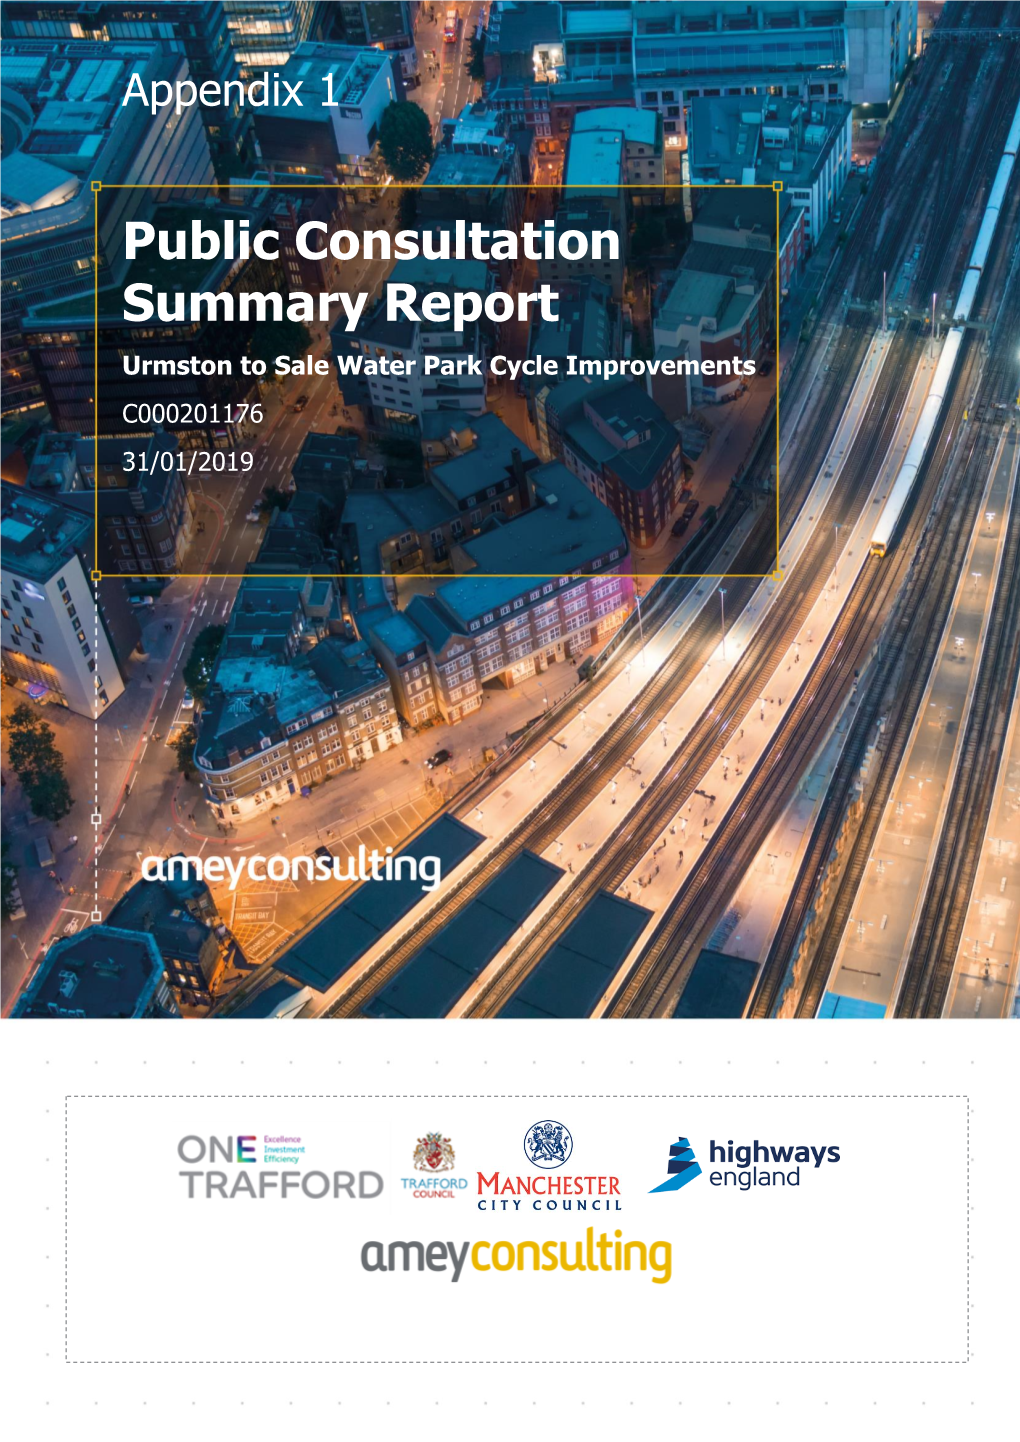 Public Consultation Summary Report Urmston to Sale Water Park Cycle Improvements C000201176 31/01/2019